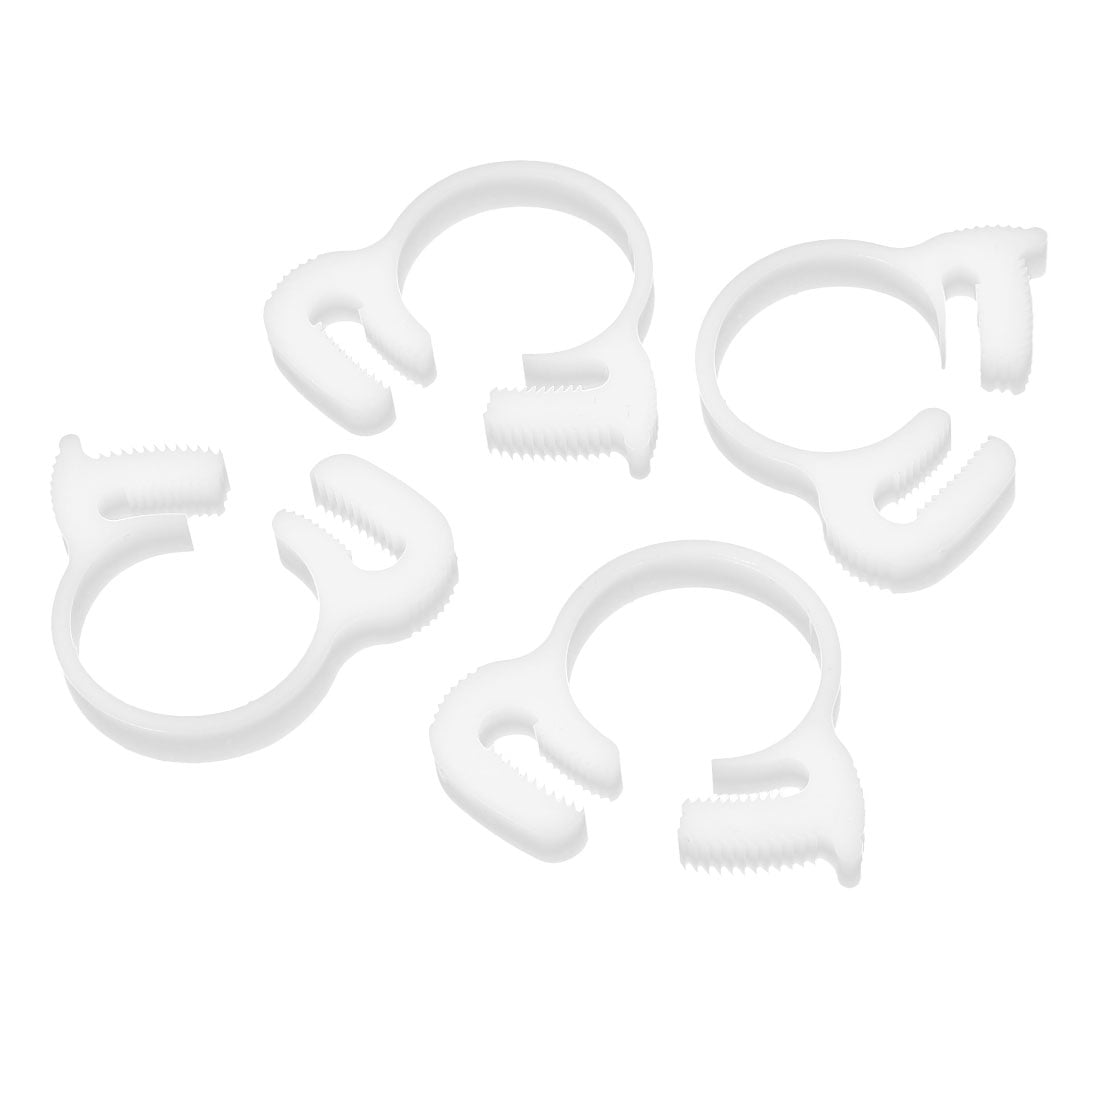 Aexit 22.8mm-24.8mm Double Clamps Gripping Ratchet Type Plastic Hose Clamps Clips White Strap Clamps 4 Pcs